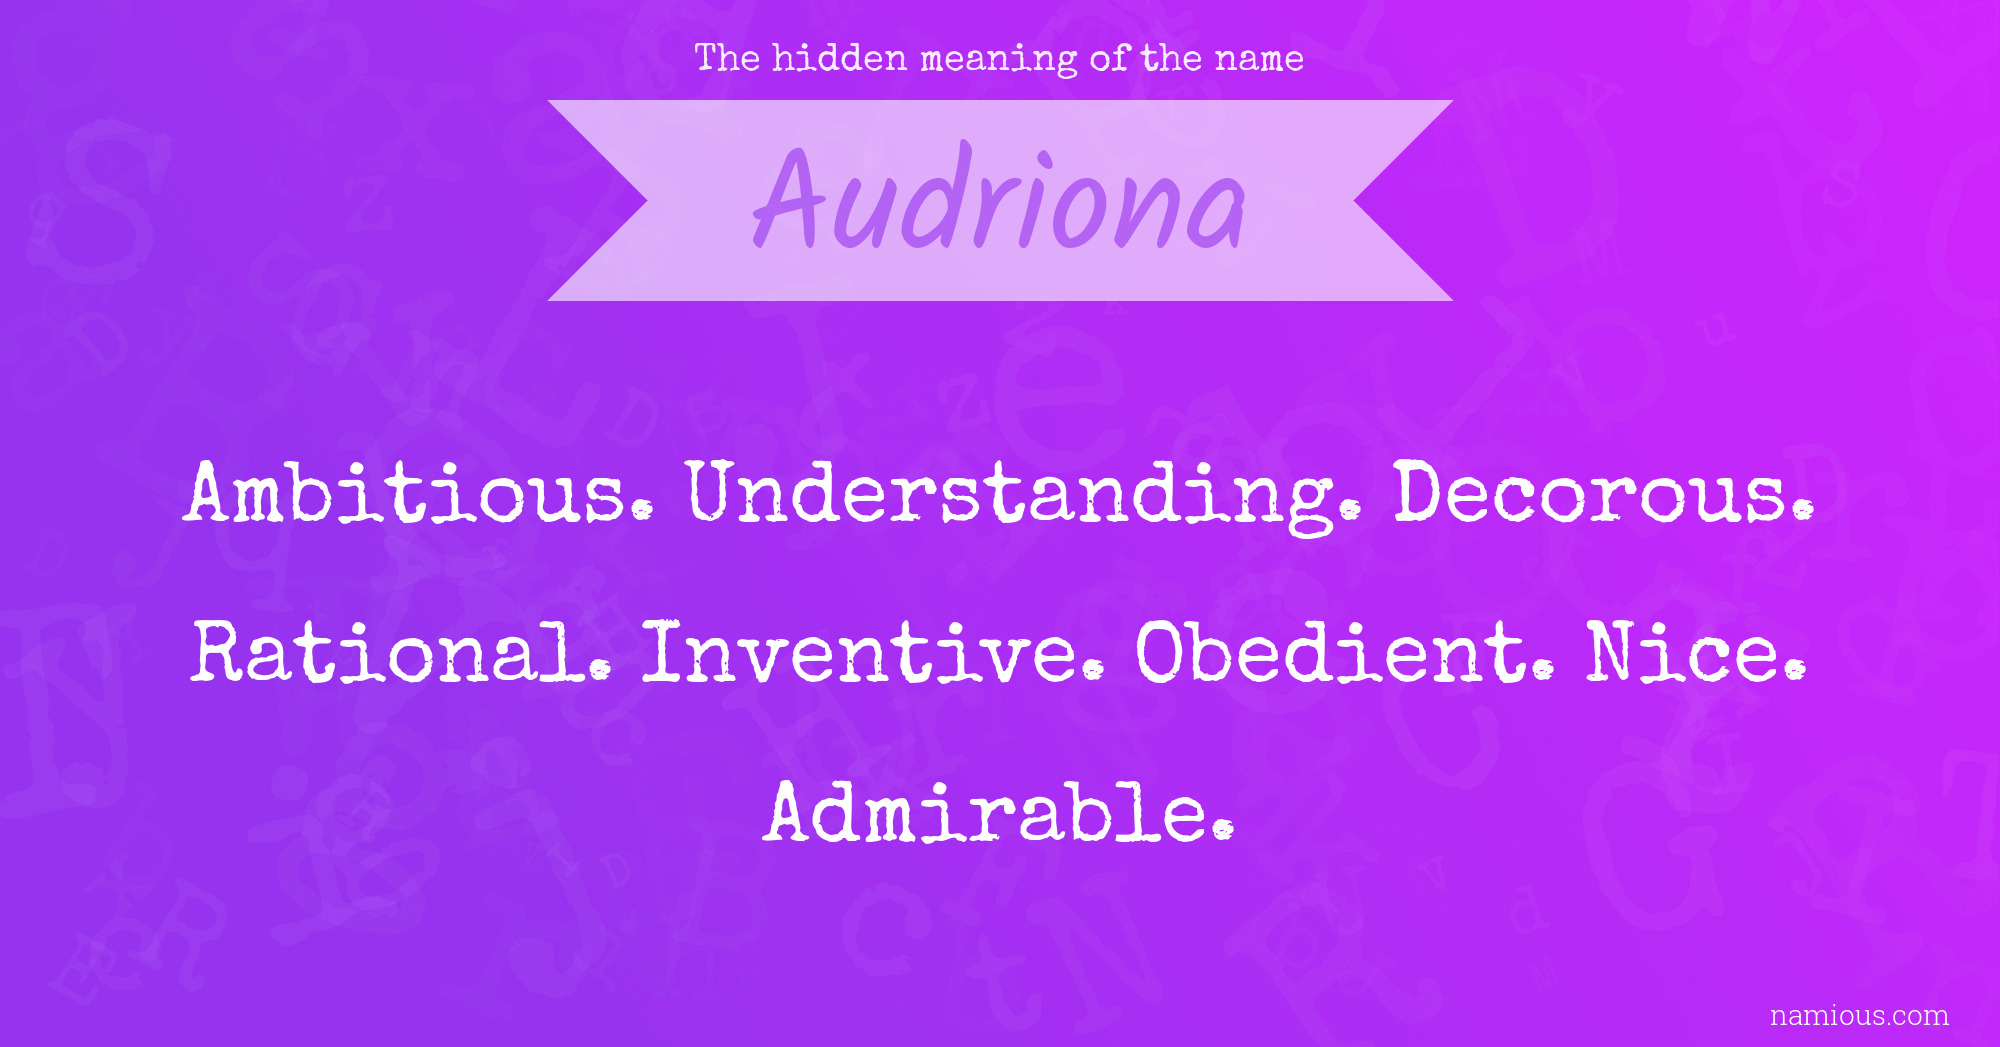 The hidden meaning of the name Audriona